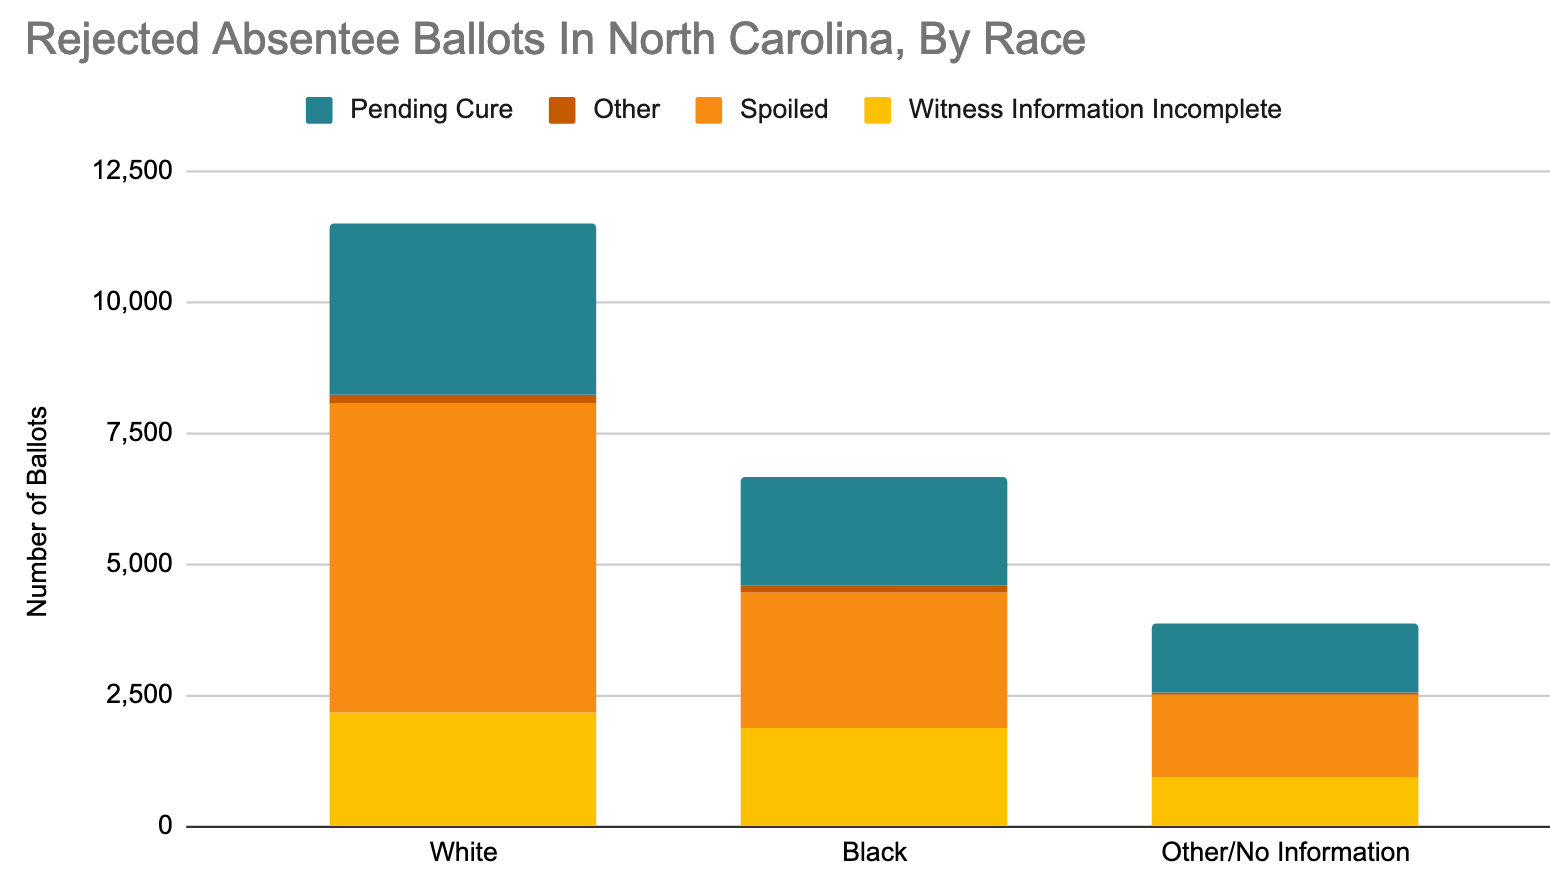 Rejected Absentee Ballots In North Carolina by Race